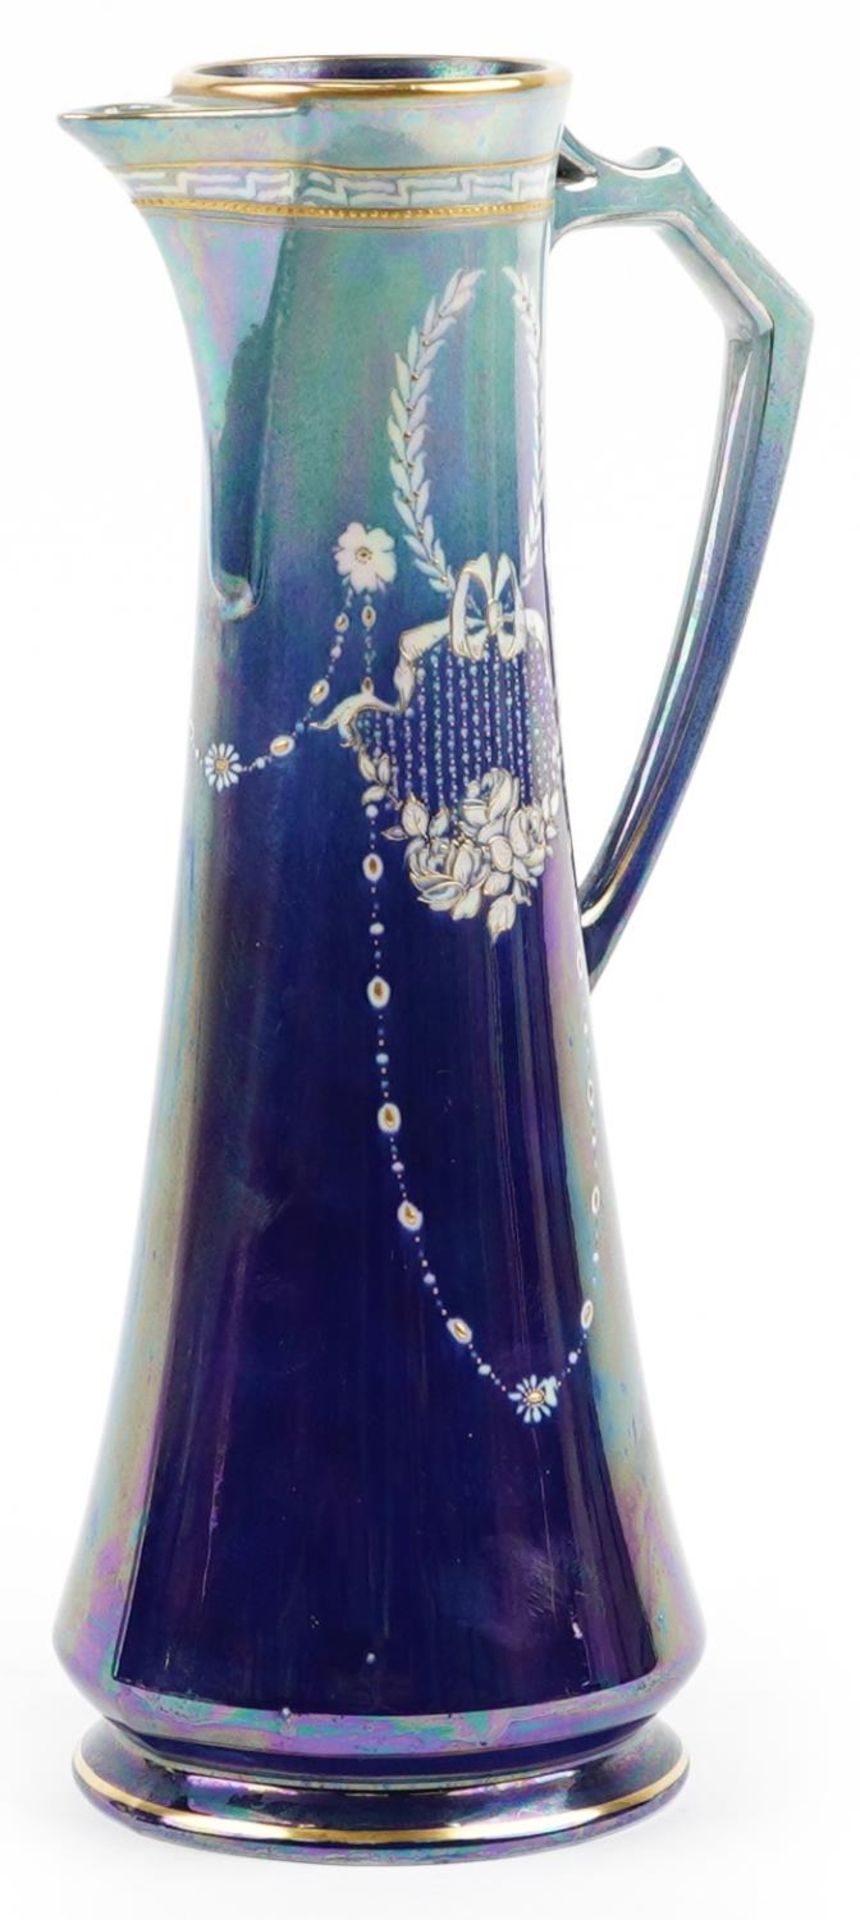 Walter Slater for Shelley, early 20th century lustre jug gilded and decorated with flowers and